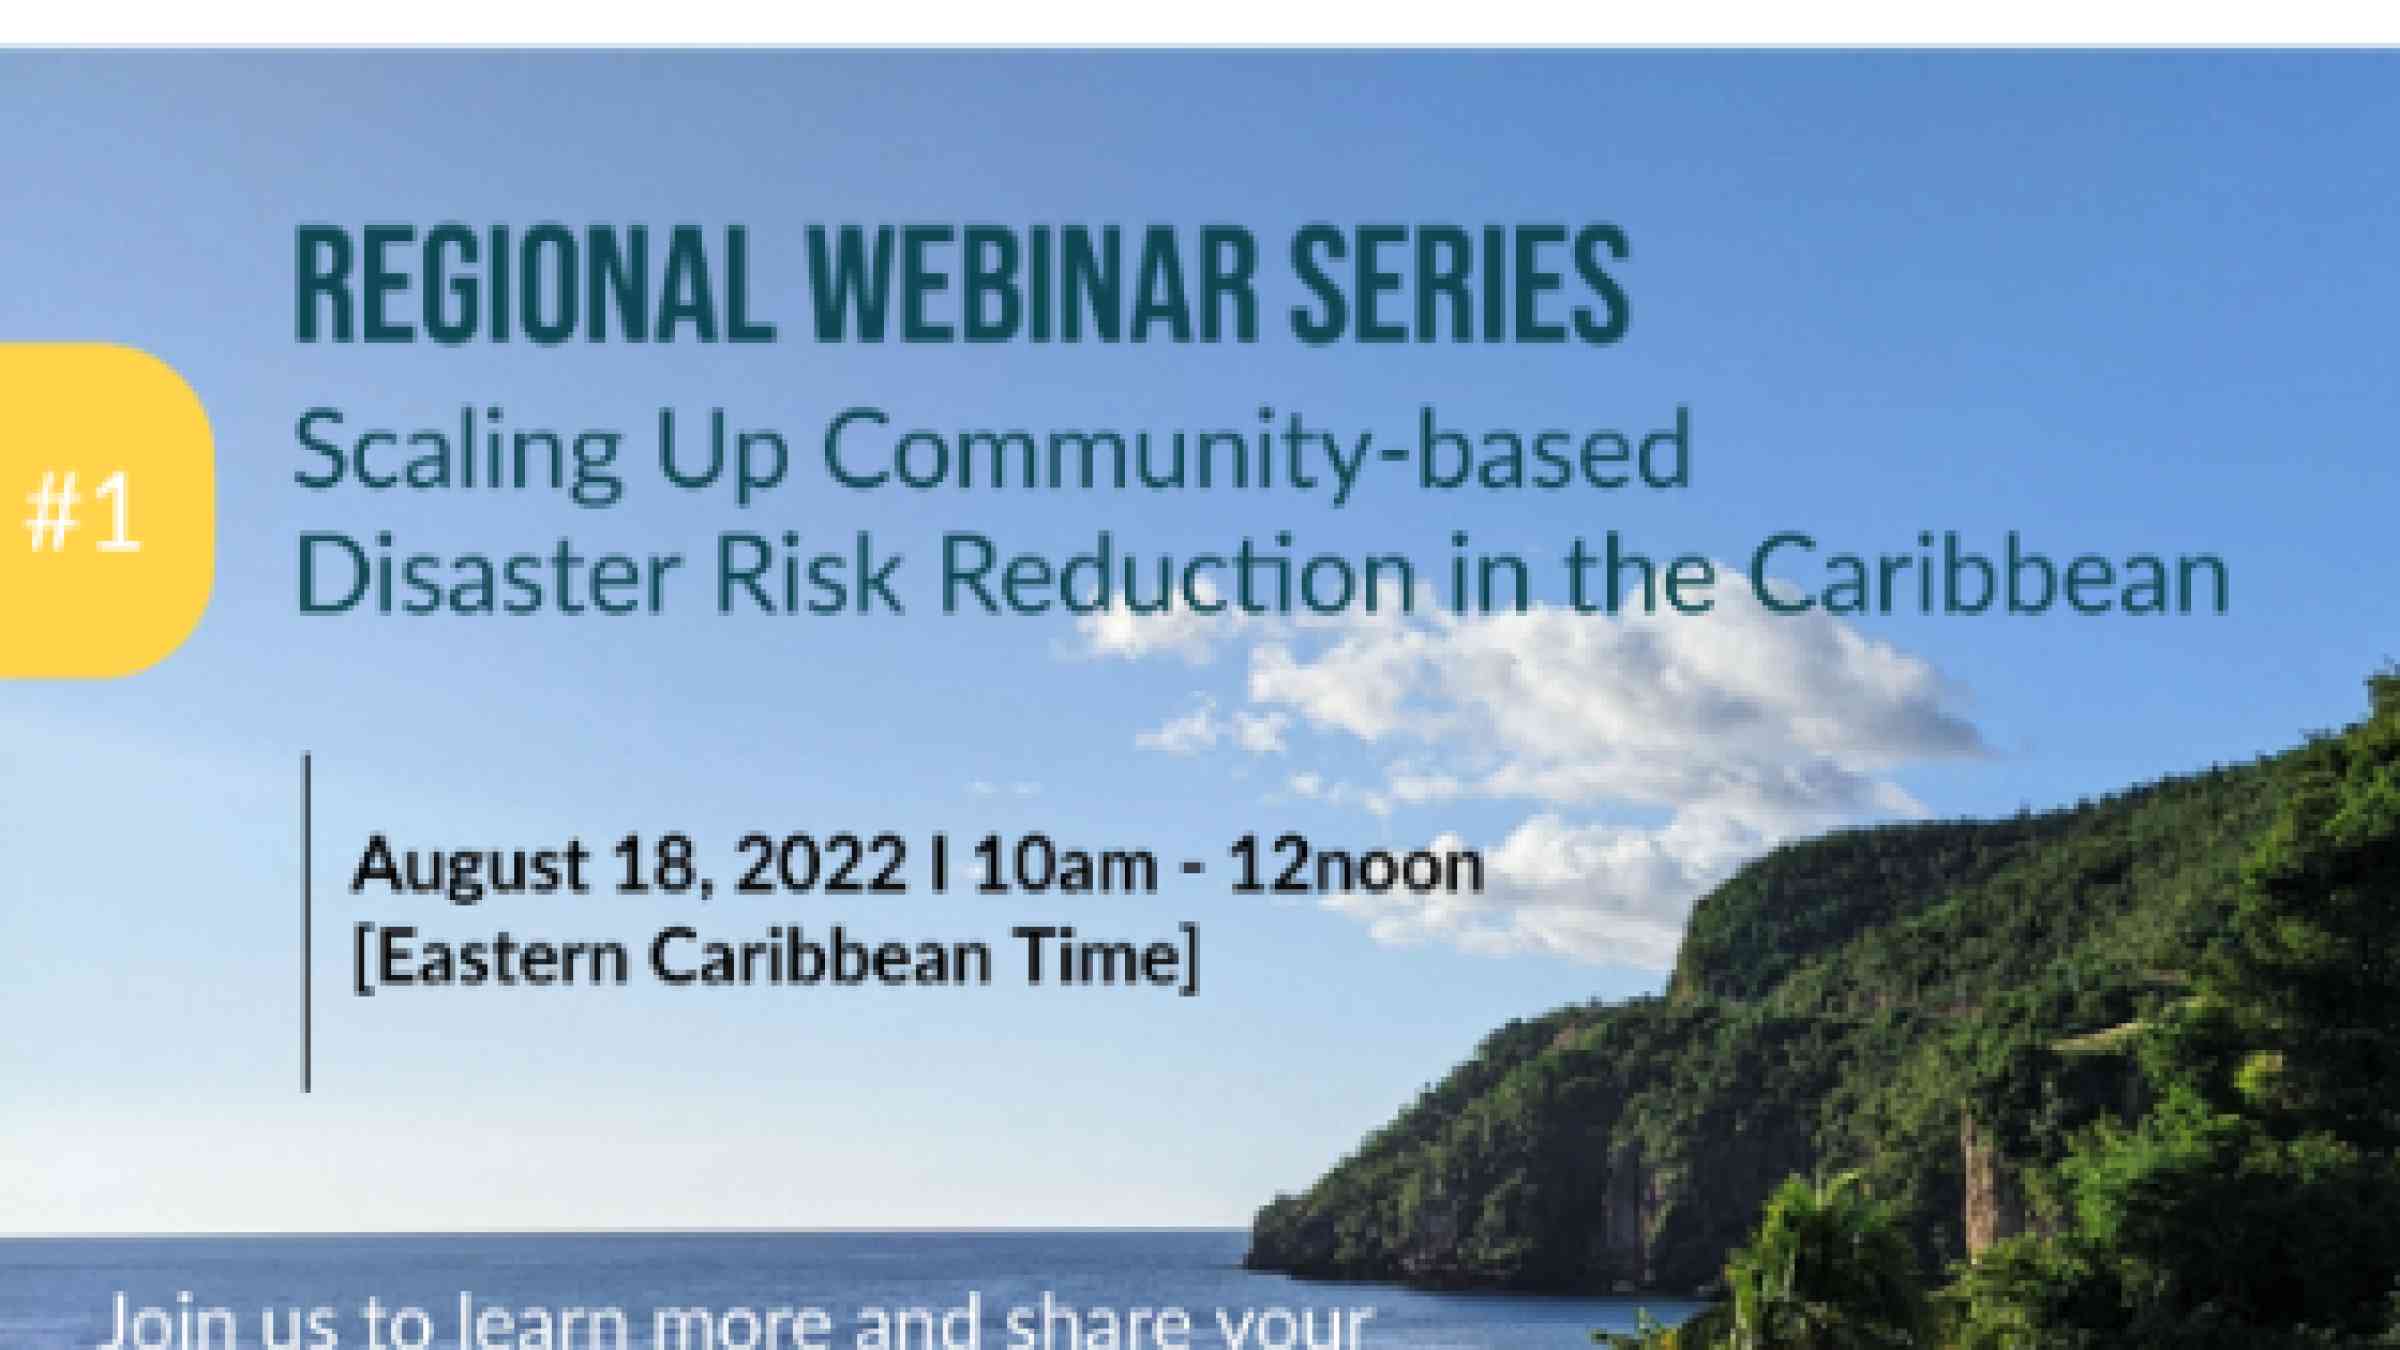 Scaling up community-based disaster risk reduction in the Caribbean flyer